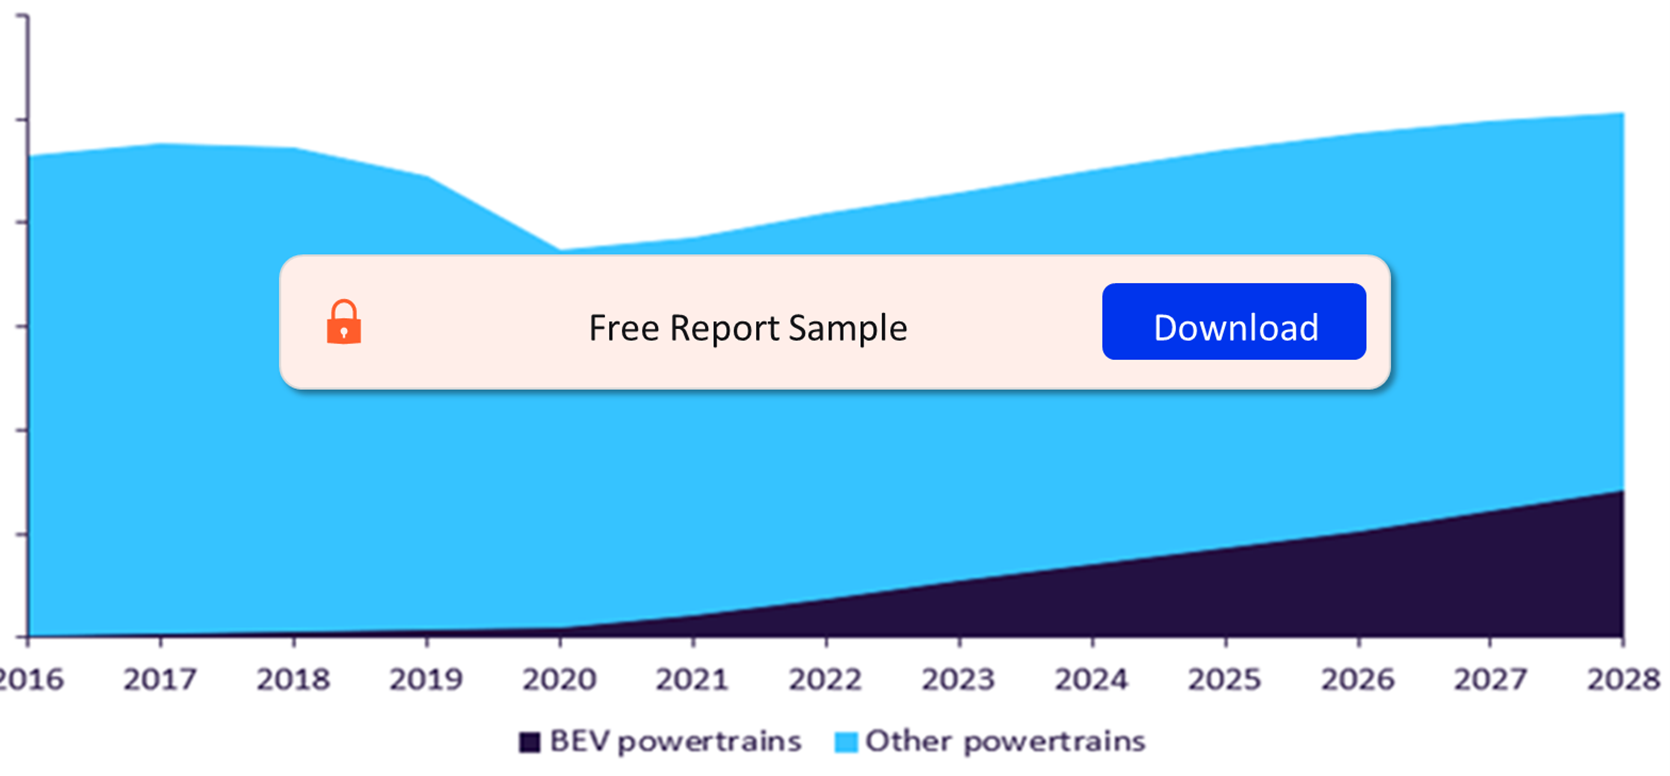 EV Powertrains as a Proportion of All New Powertrains 2016 - 2028